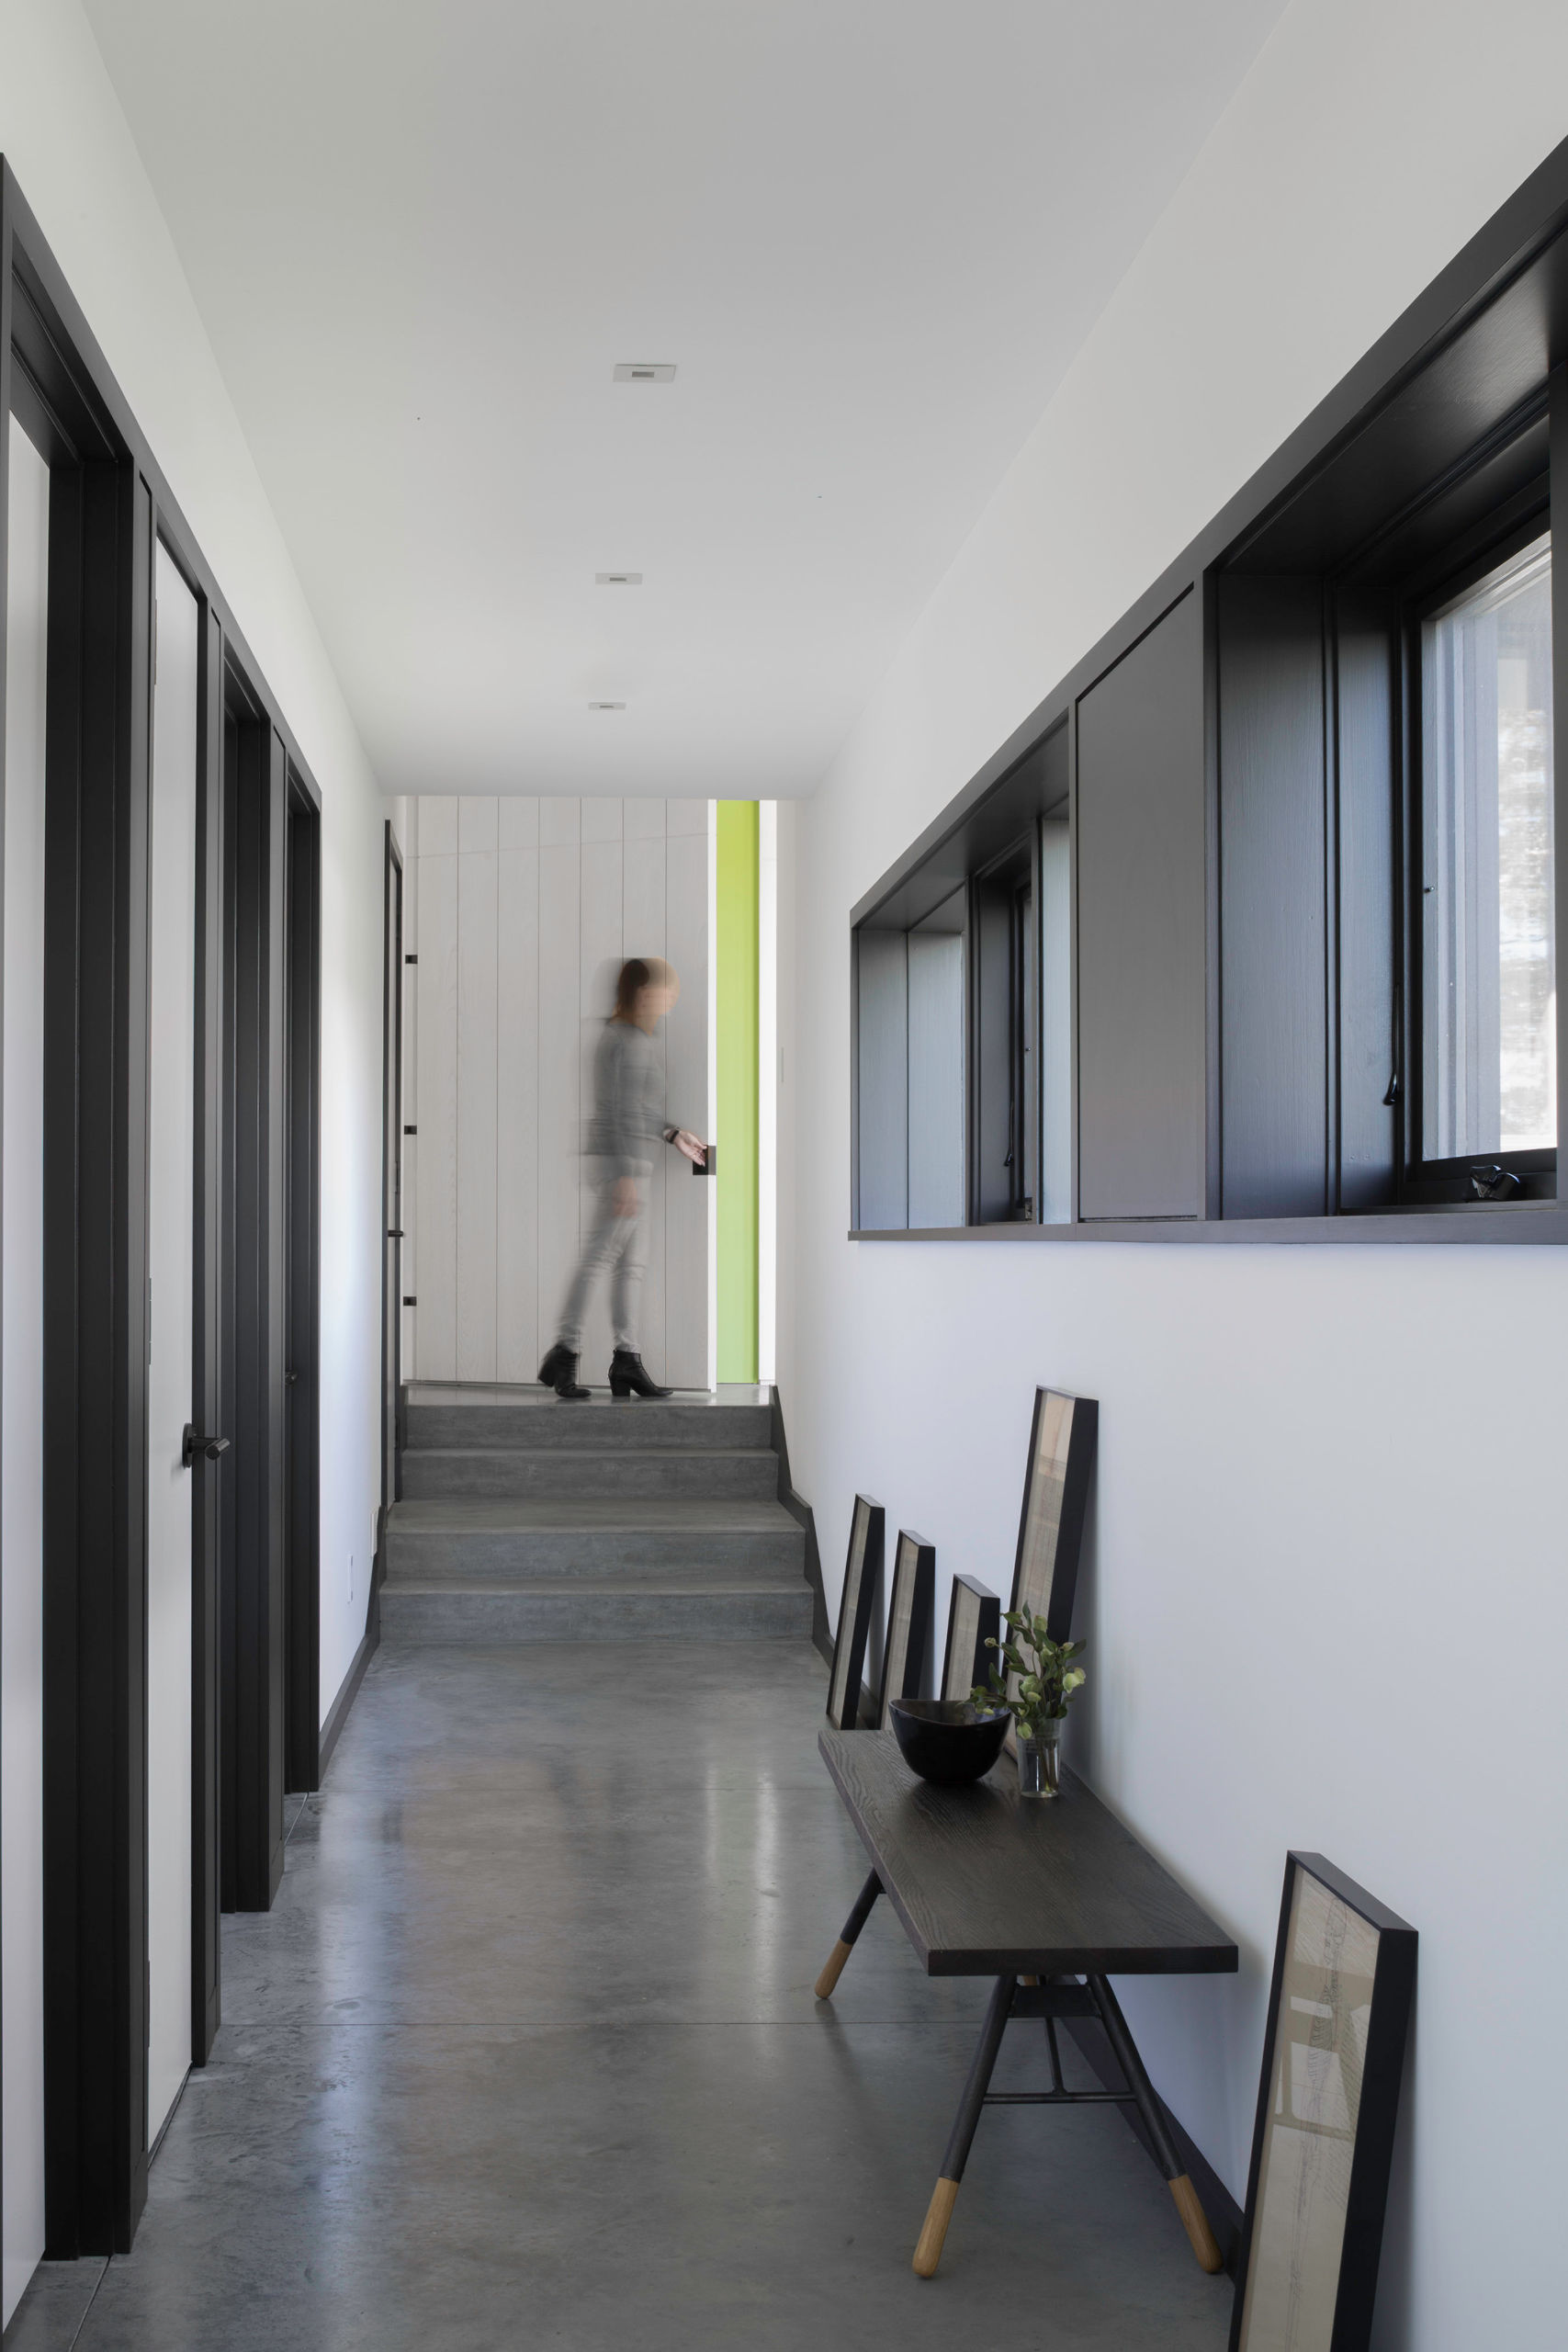 Looking down the hallway in the bedroom wing, with polished concrete floor and row of high windows along right side